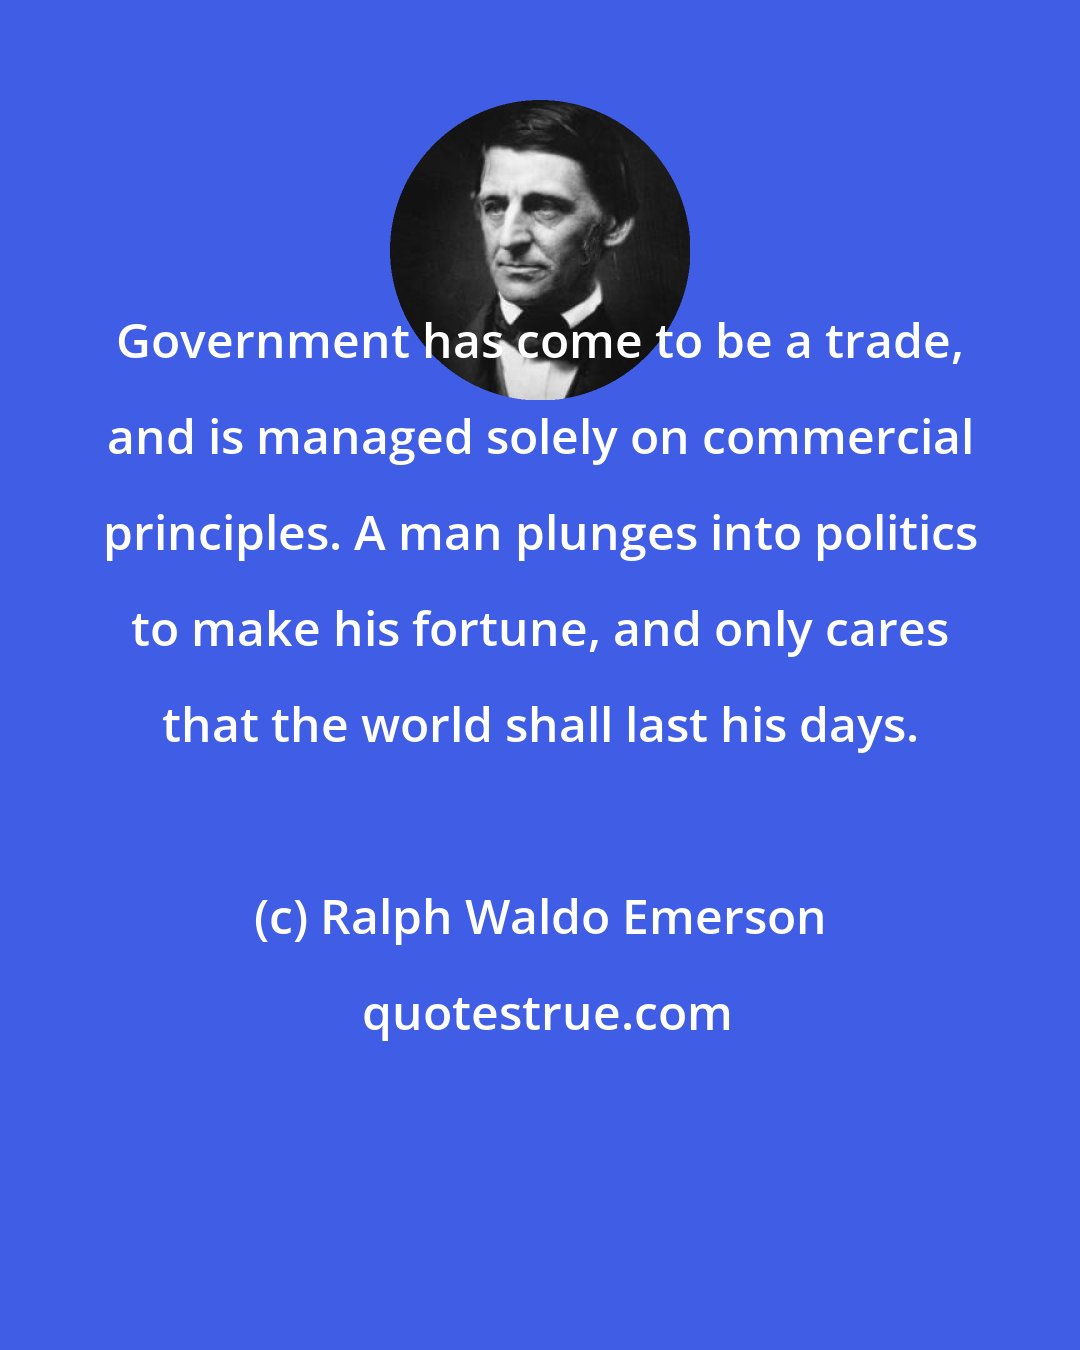 Ralph Waldo Emerson: Government has come to be a trade, and is managed solely on commercial principles. A man plunges into politics to make his fortune, and only cares that the world shall last his days.